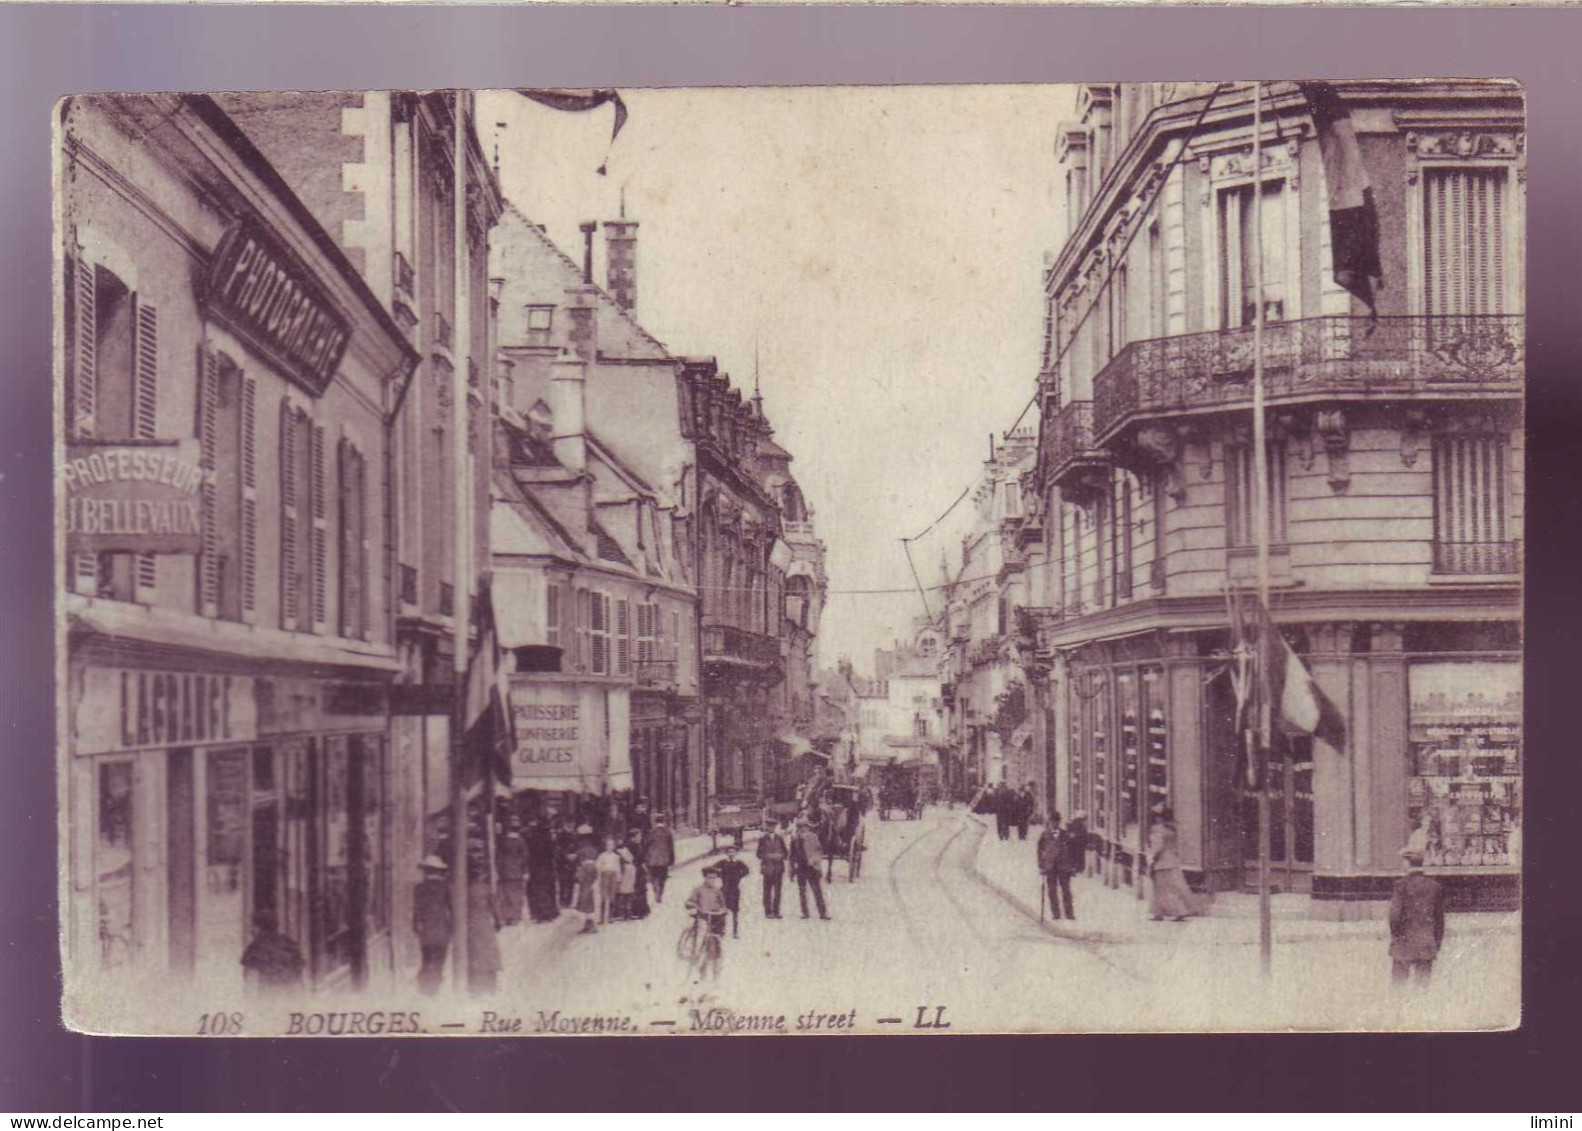 18 - BOURGES - RUE MOYENNE - ANIMEE - ATTELAGE - - Bourges